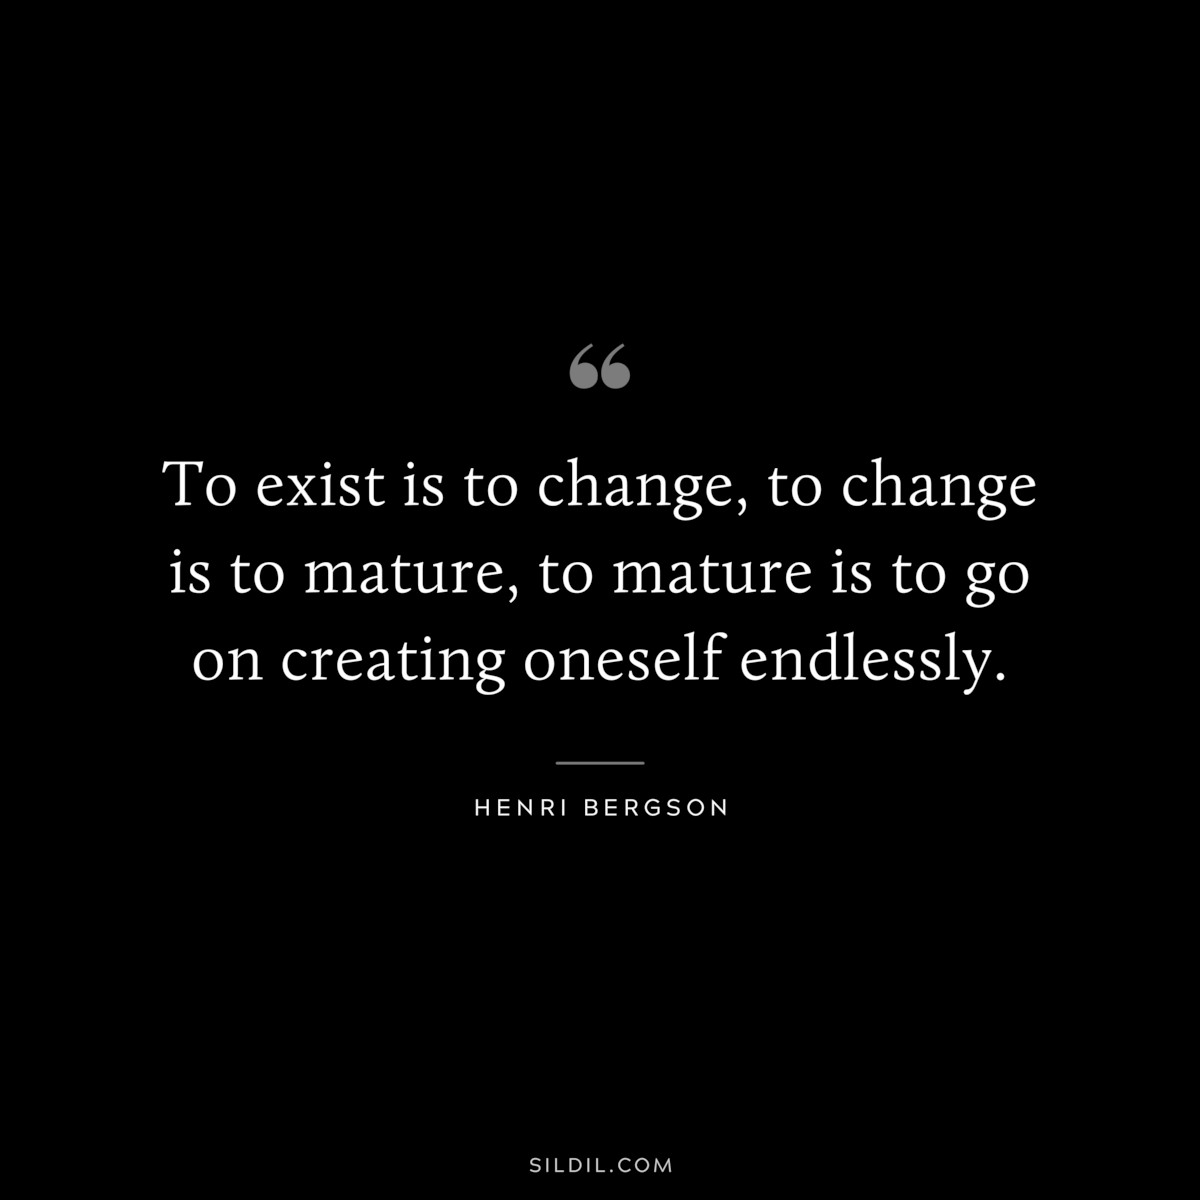 To exist is to change, to change is to mature, to mature is to go on creating oneself endlessly. ― Henri Bergson